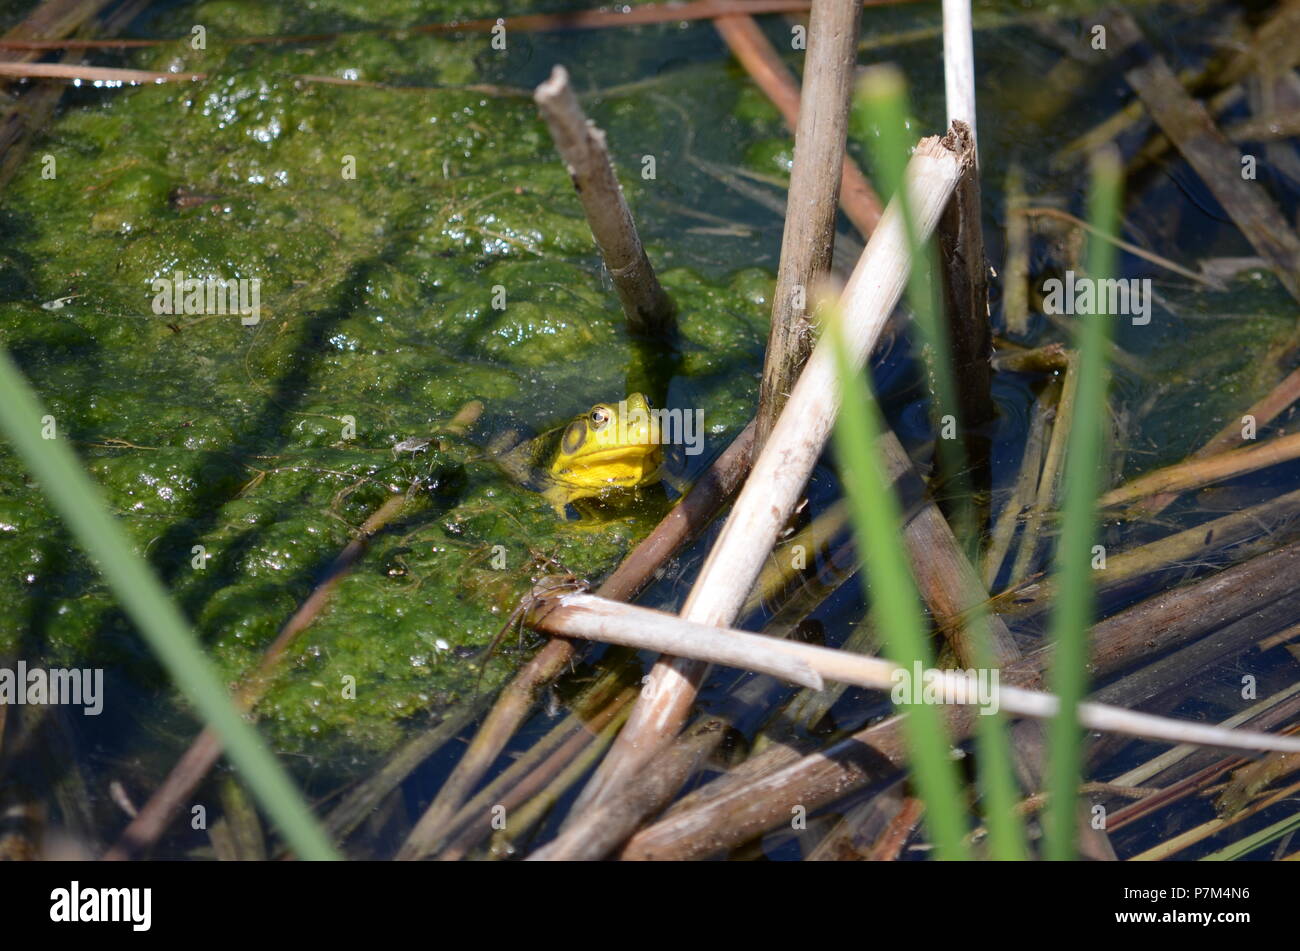 Green frog, male, with yellow throat during breeding season in Ontario, Canada. Stock Photo